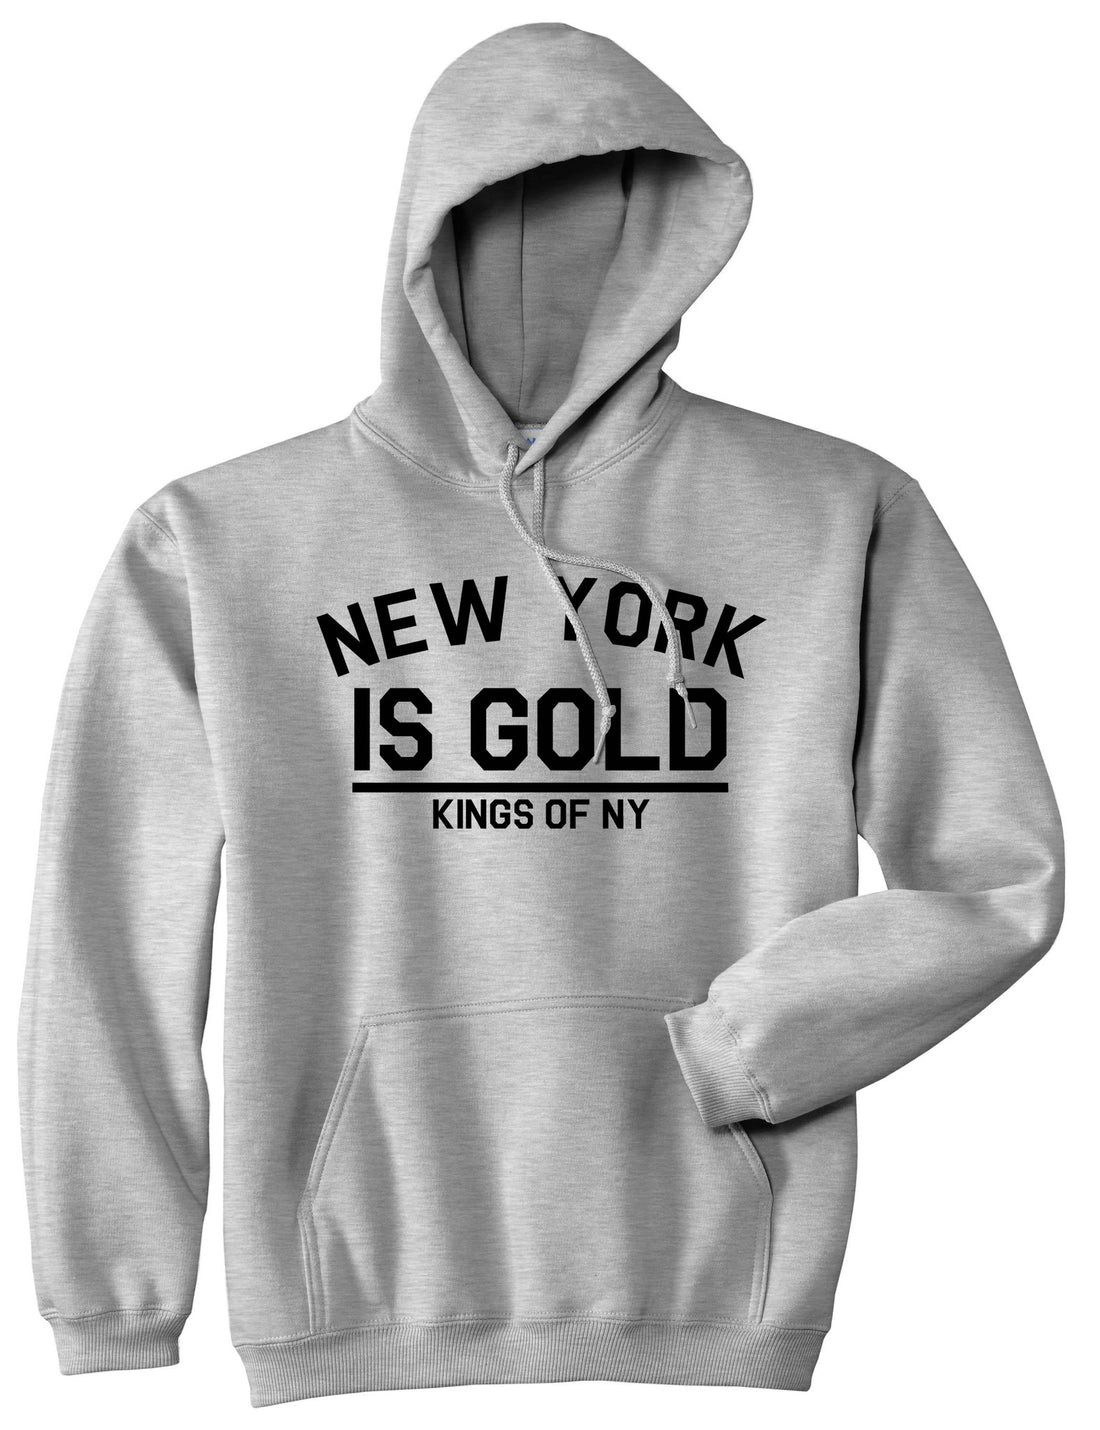 New York Is Gold Pullover Hoodie Hoody in Grey by Kings Of NY